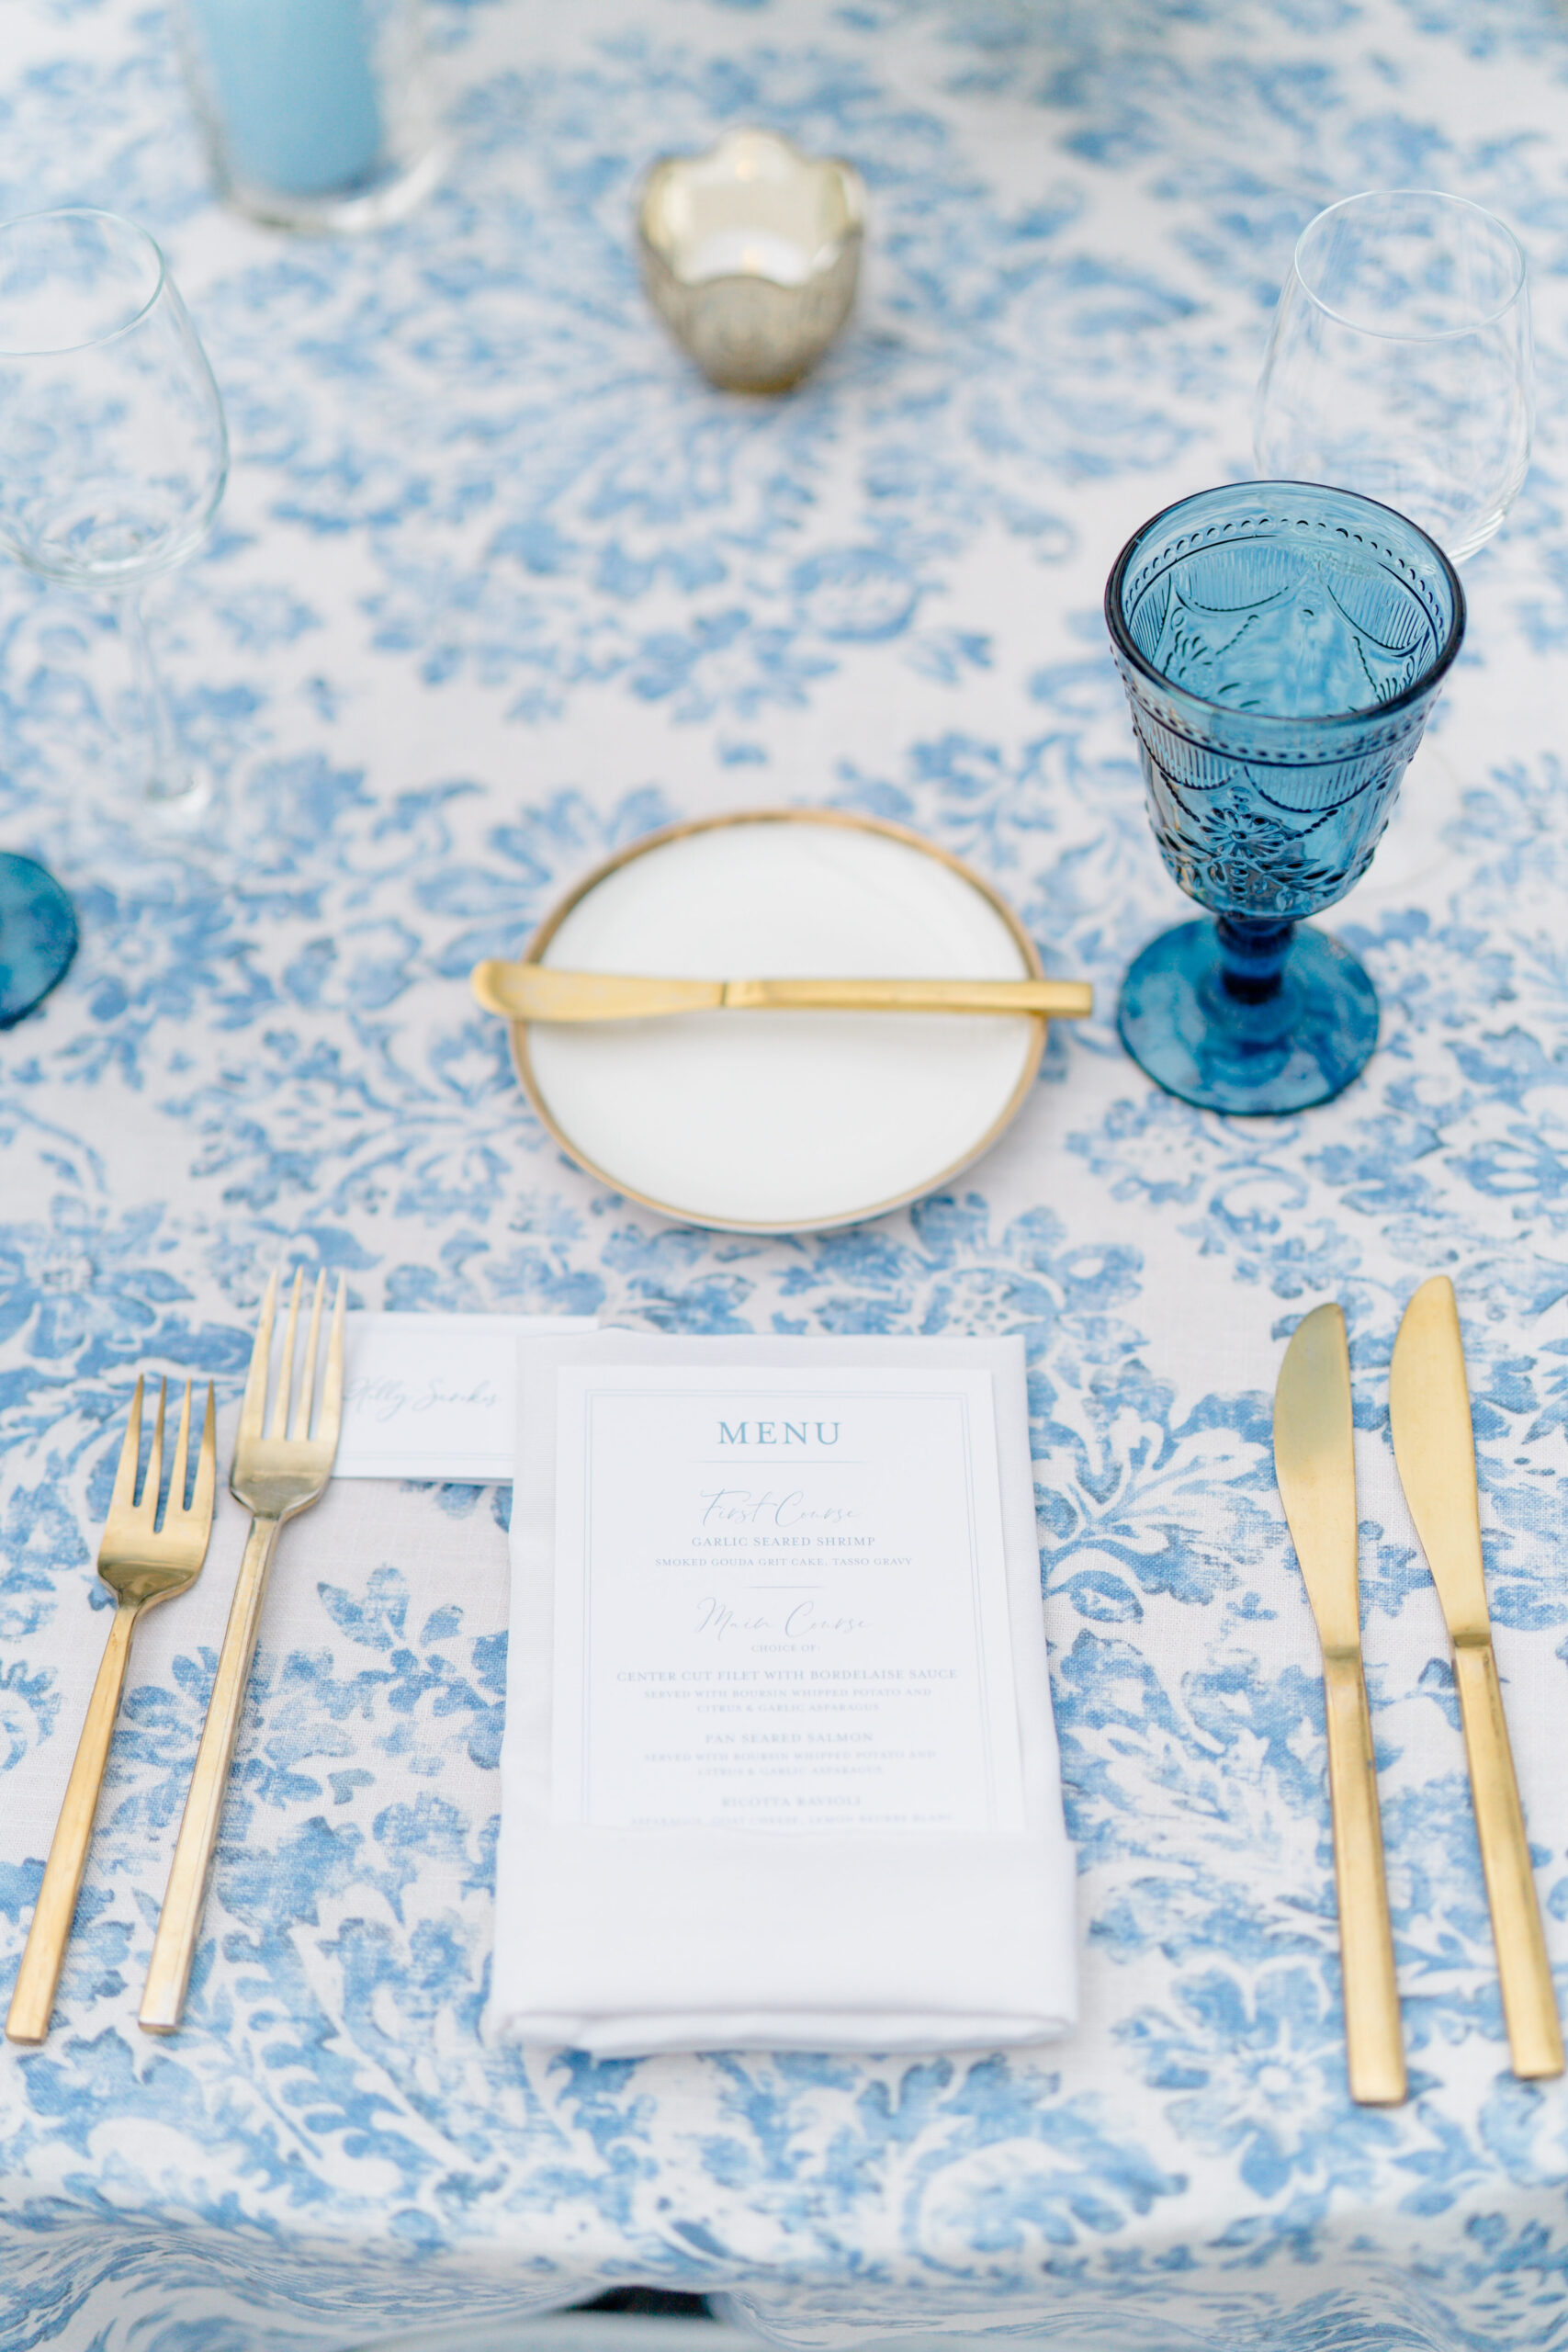 Blue and white floral table cloth with gold utensils and blue glass chalice.